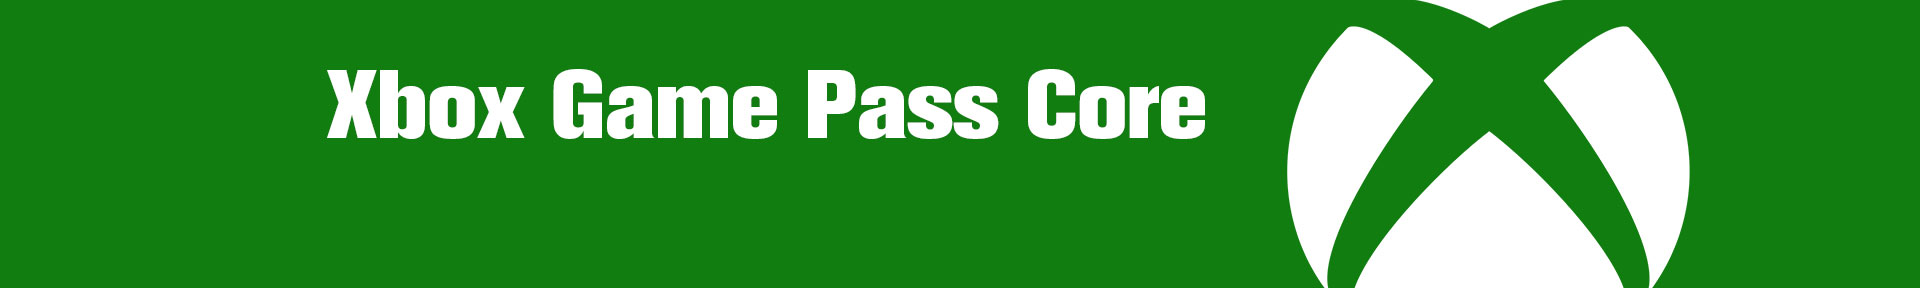 Xbox Game Pass Core Gift Cards